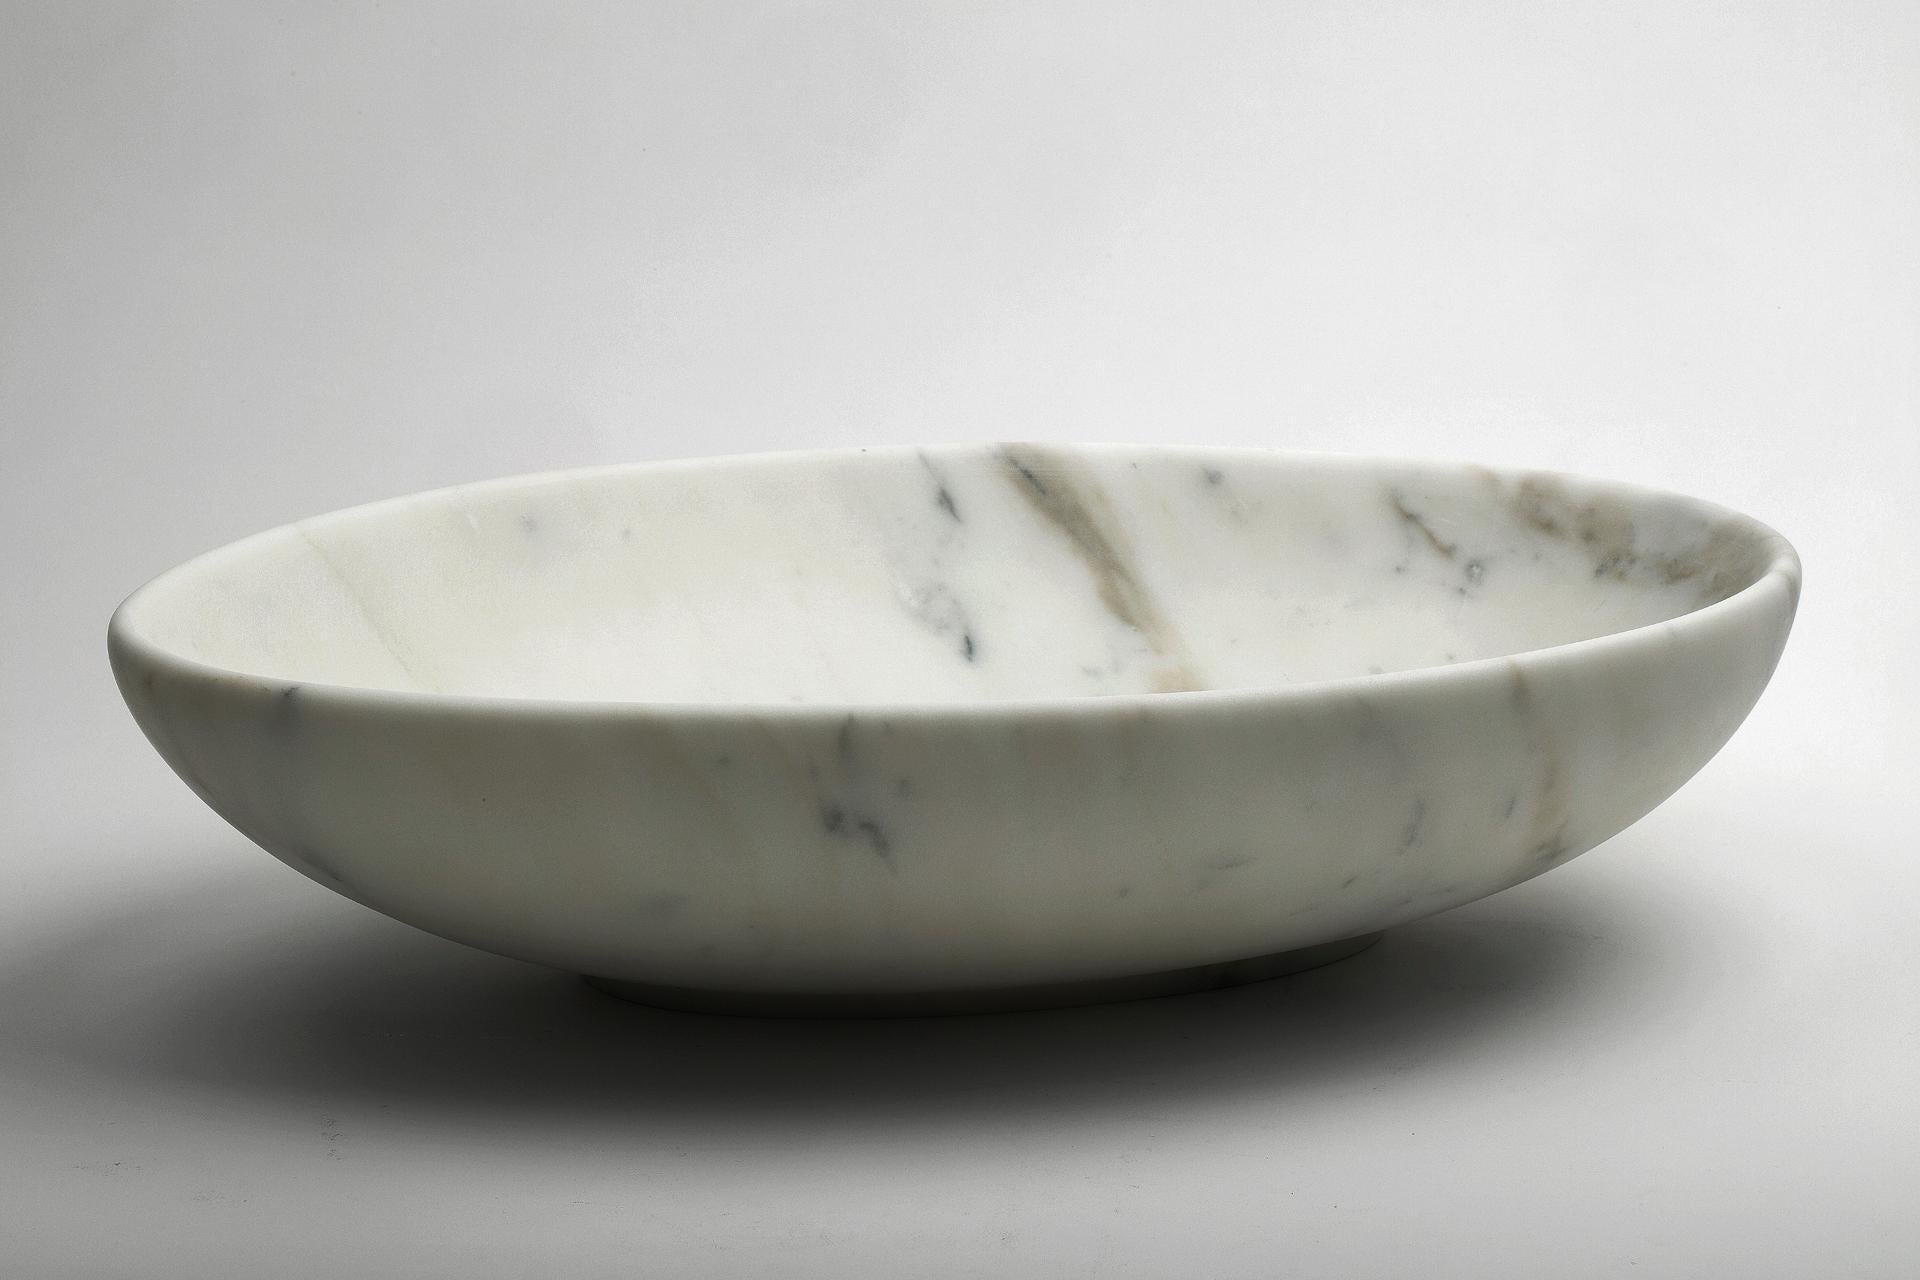 Hand-Crafted Big Oval Bowl in White Carrara Marble Handcrafted in Italy